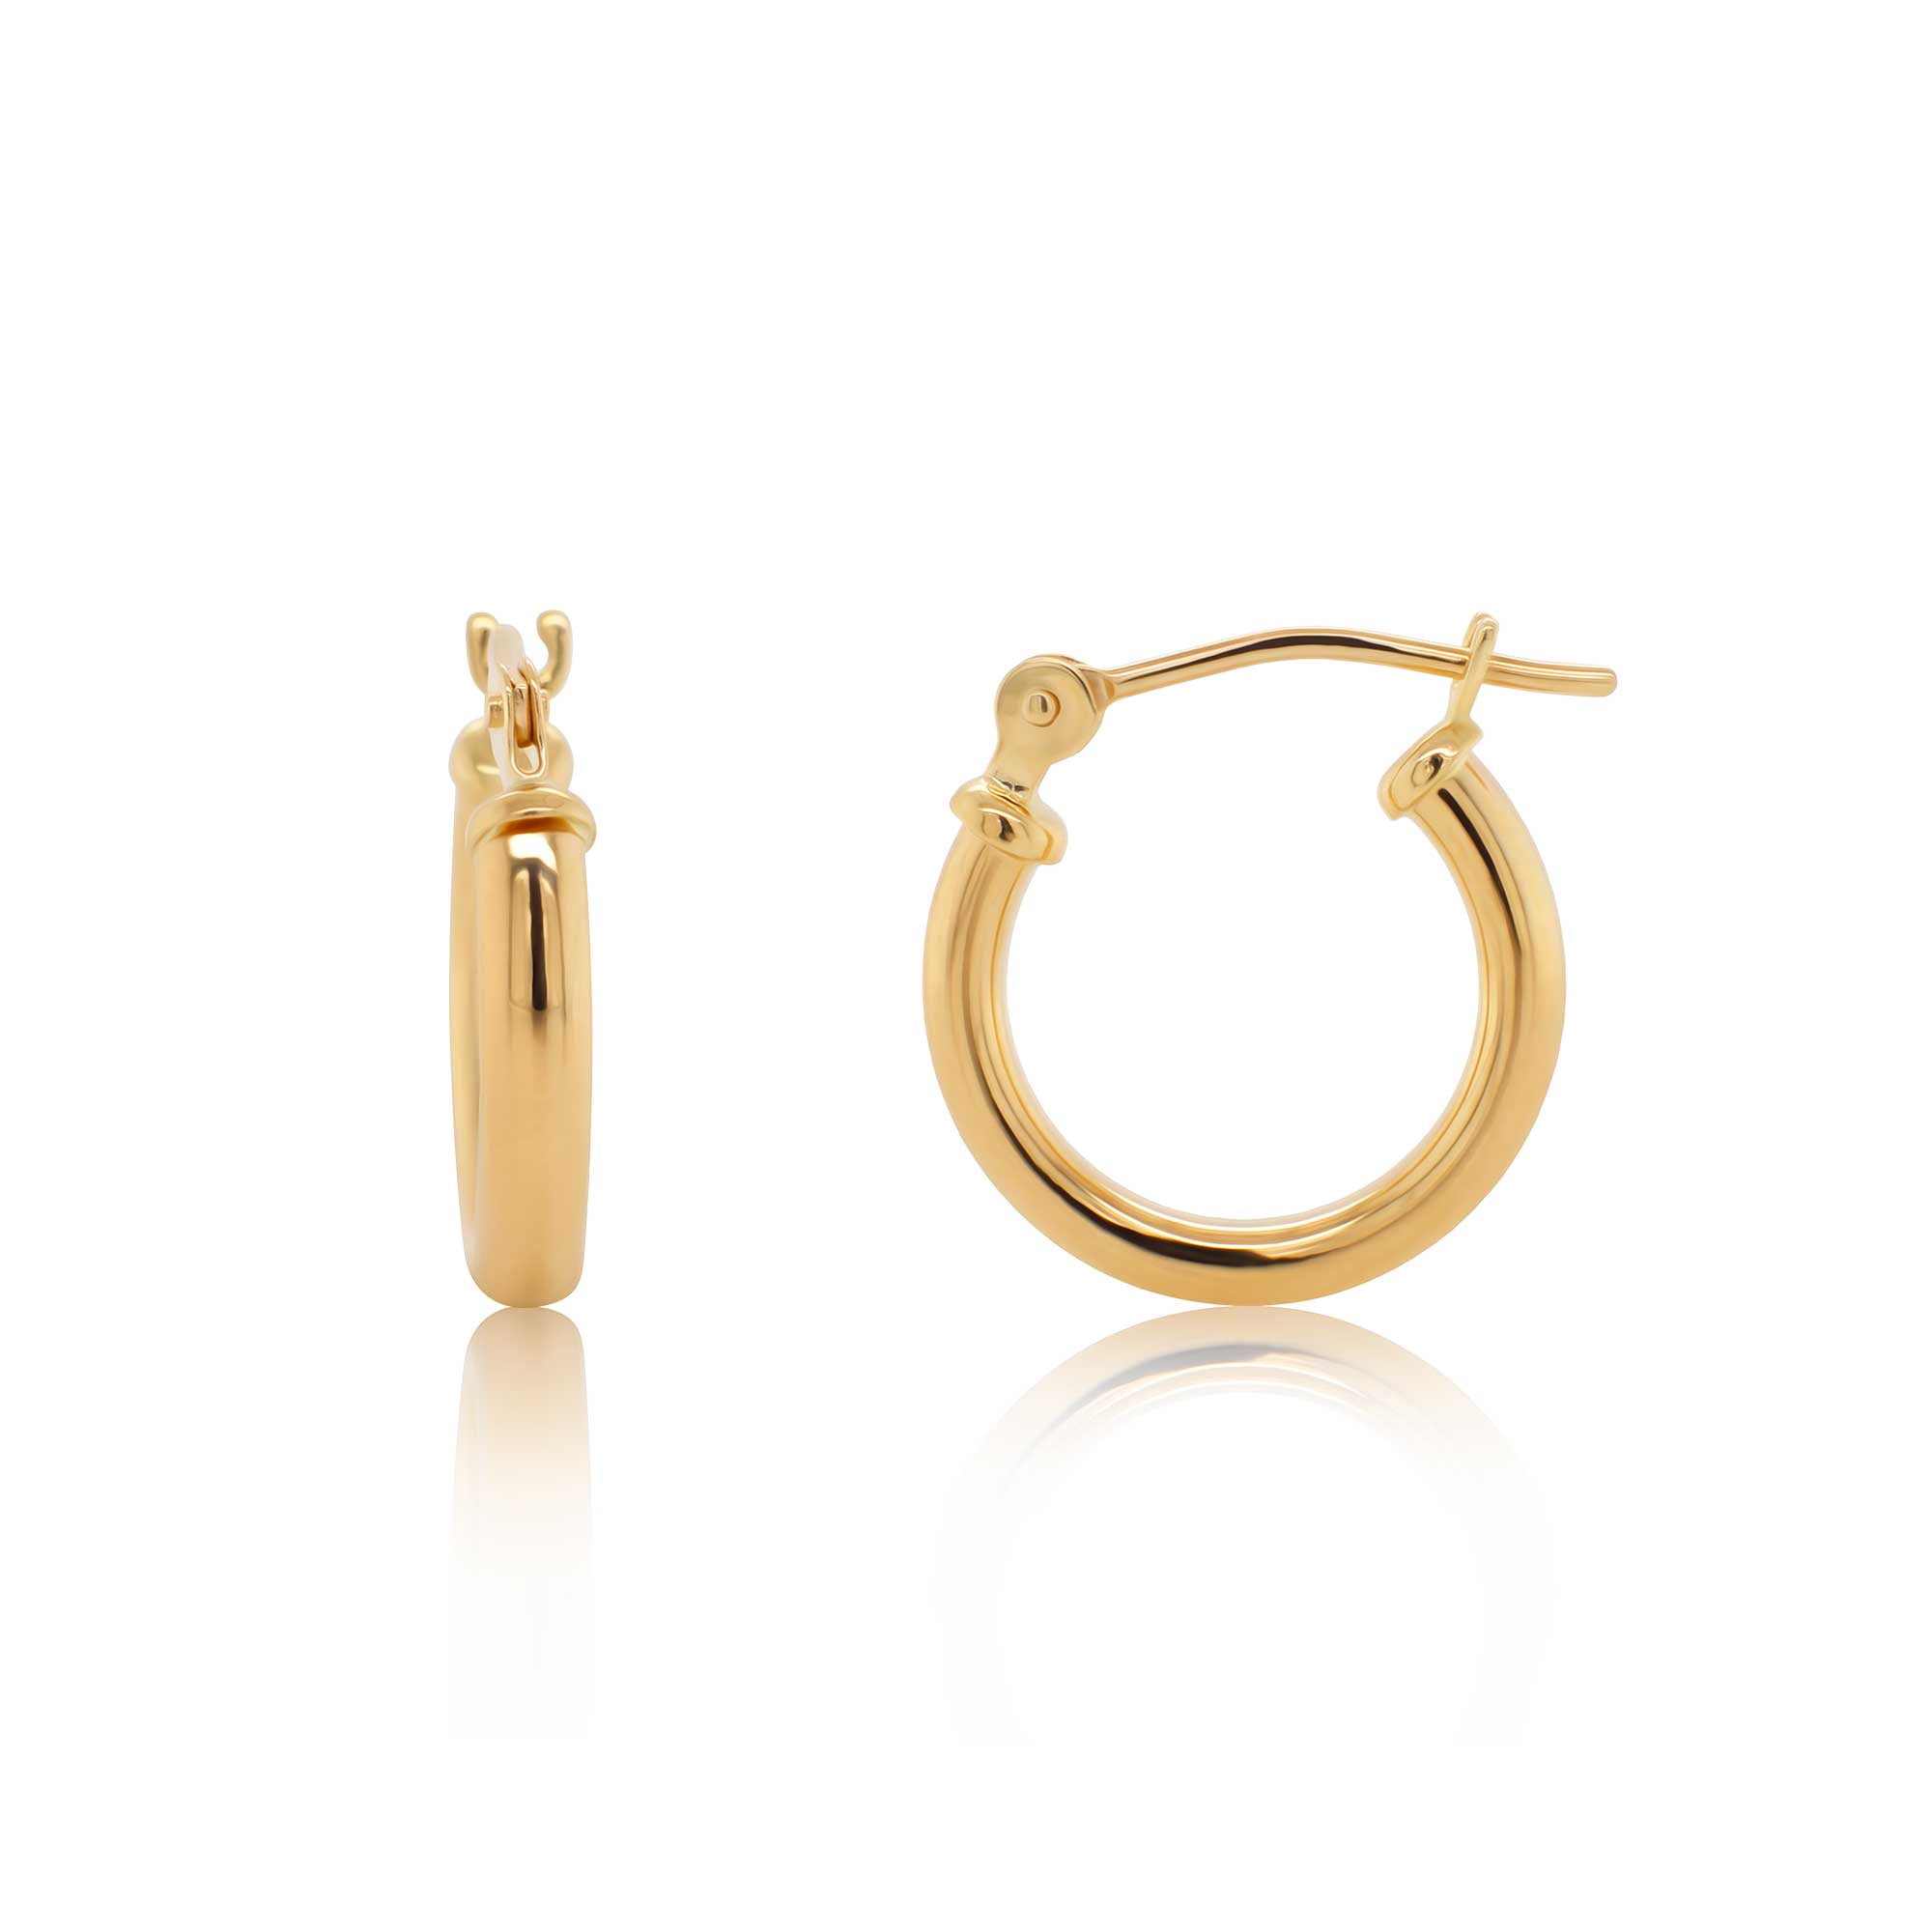 Gift for Her Fashion Accessories 14k Gold Hoop Earrings Gold Hoop Style 1.5 inch